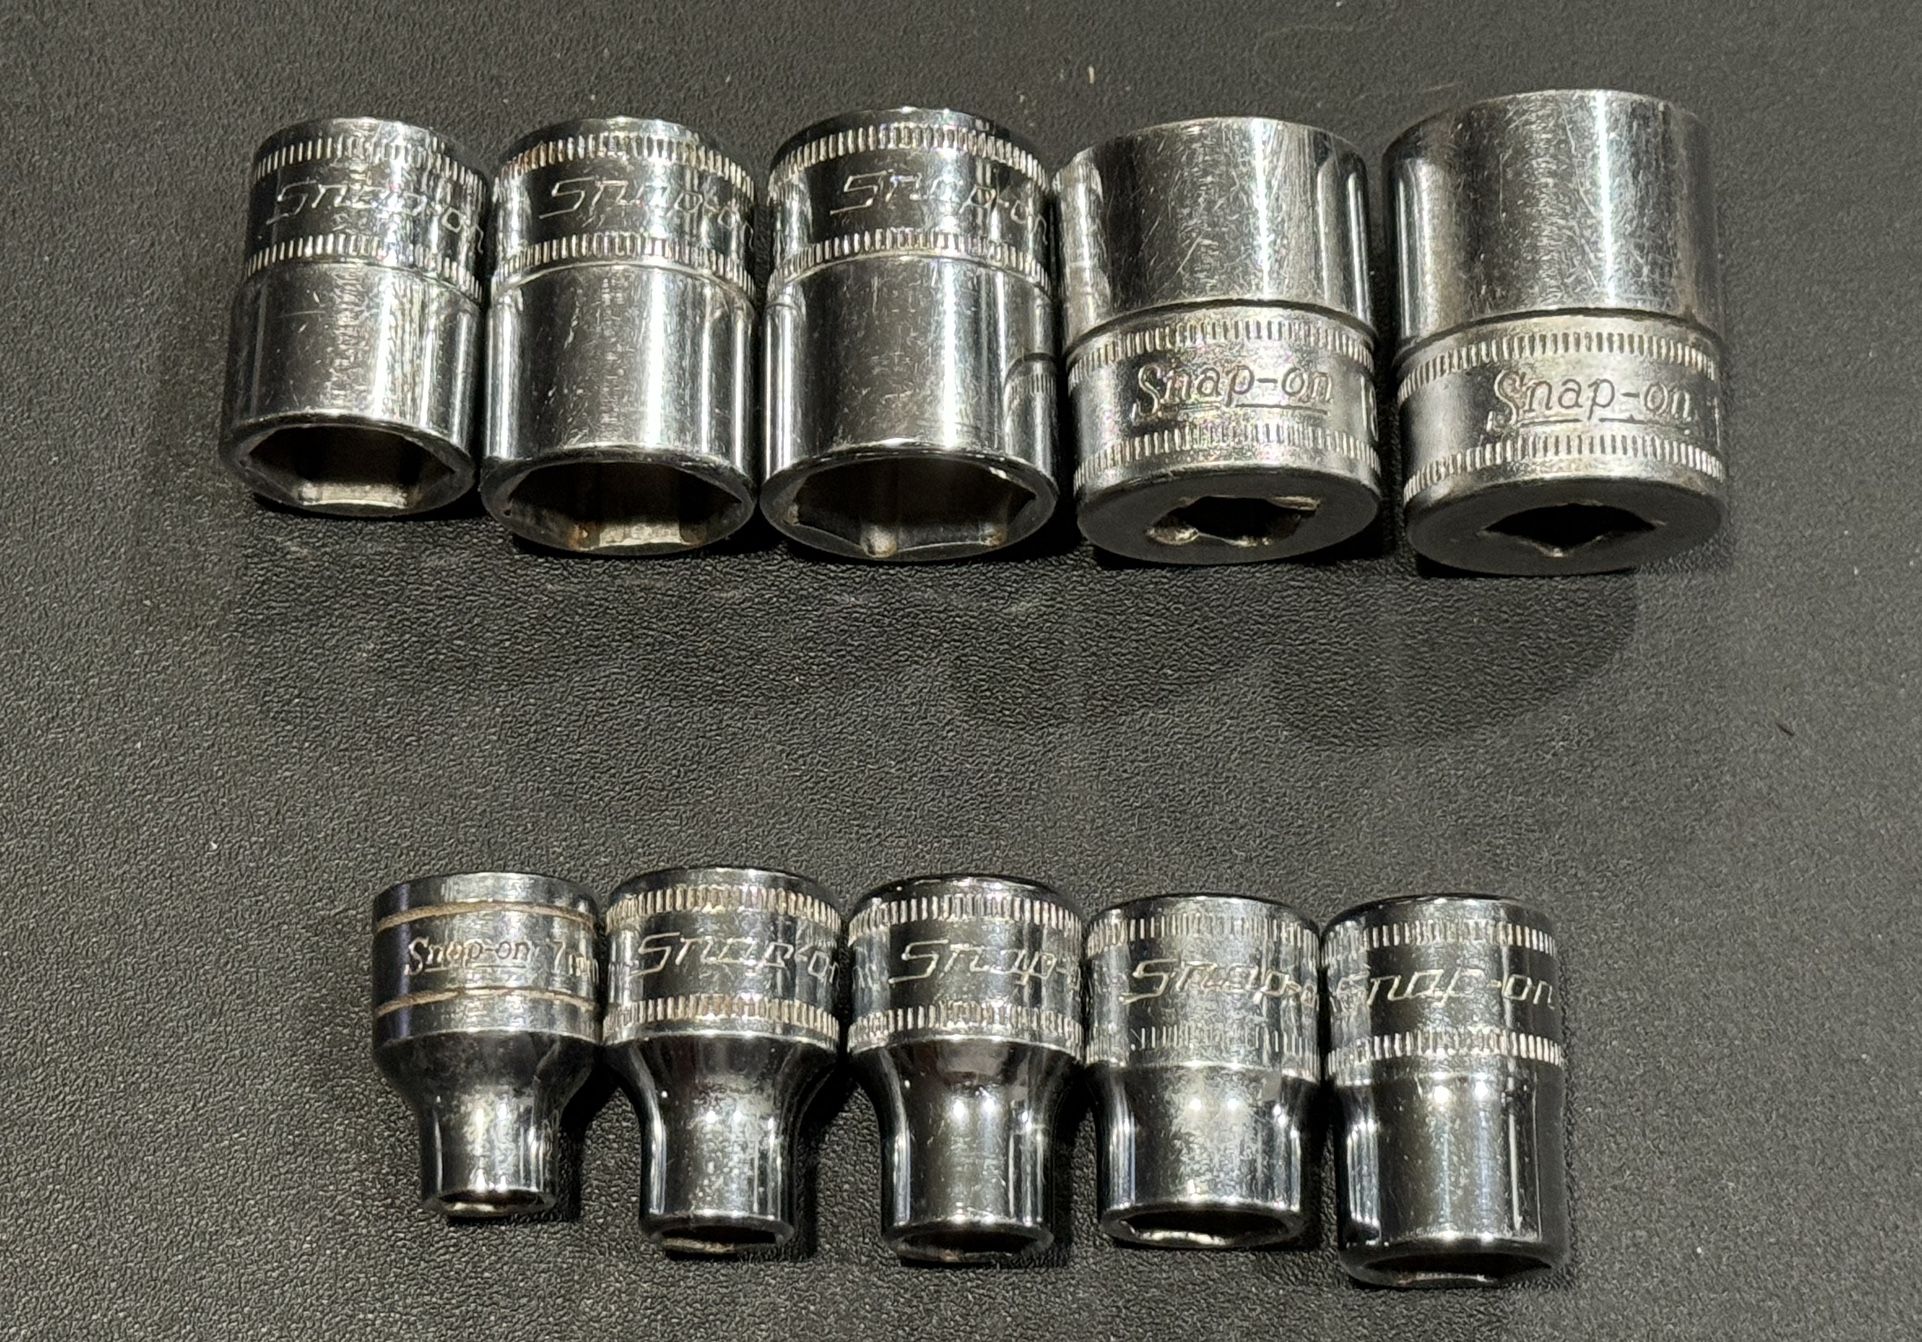 Snap On Tools Metric FSM Series Shallow Sockets 3/8” Dr 6Pt. 10 piece set. Includes 7,8 9,11,12,14,16,17,18,19mm